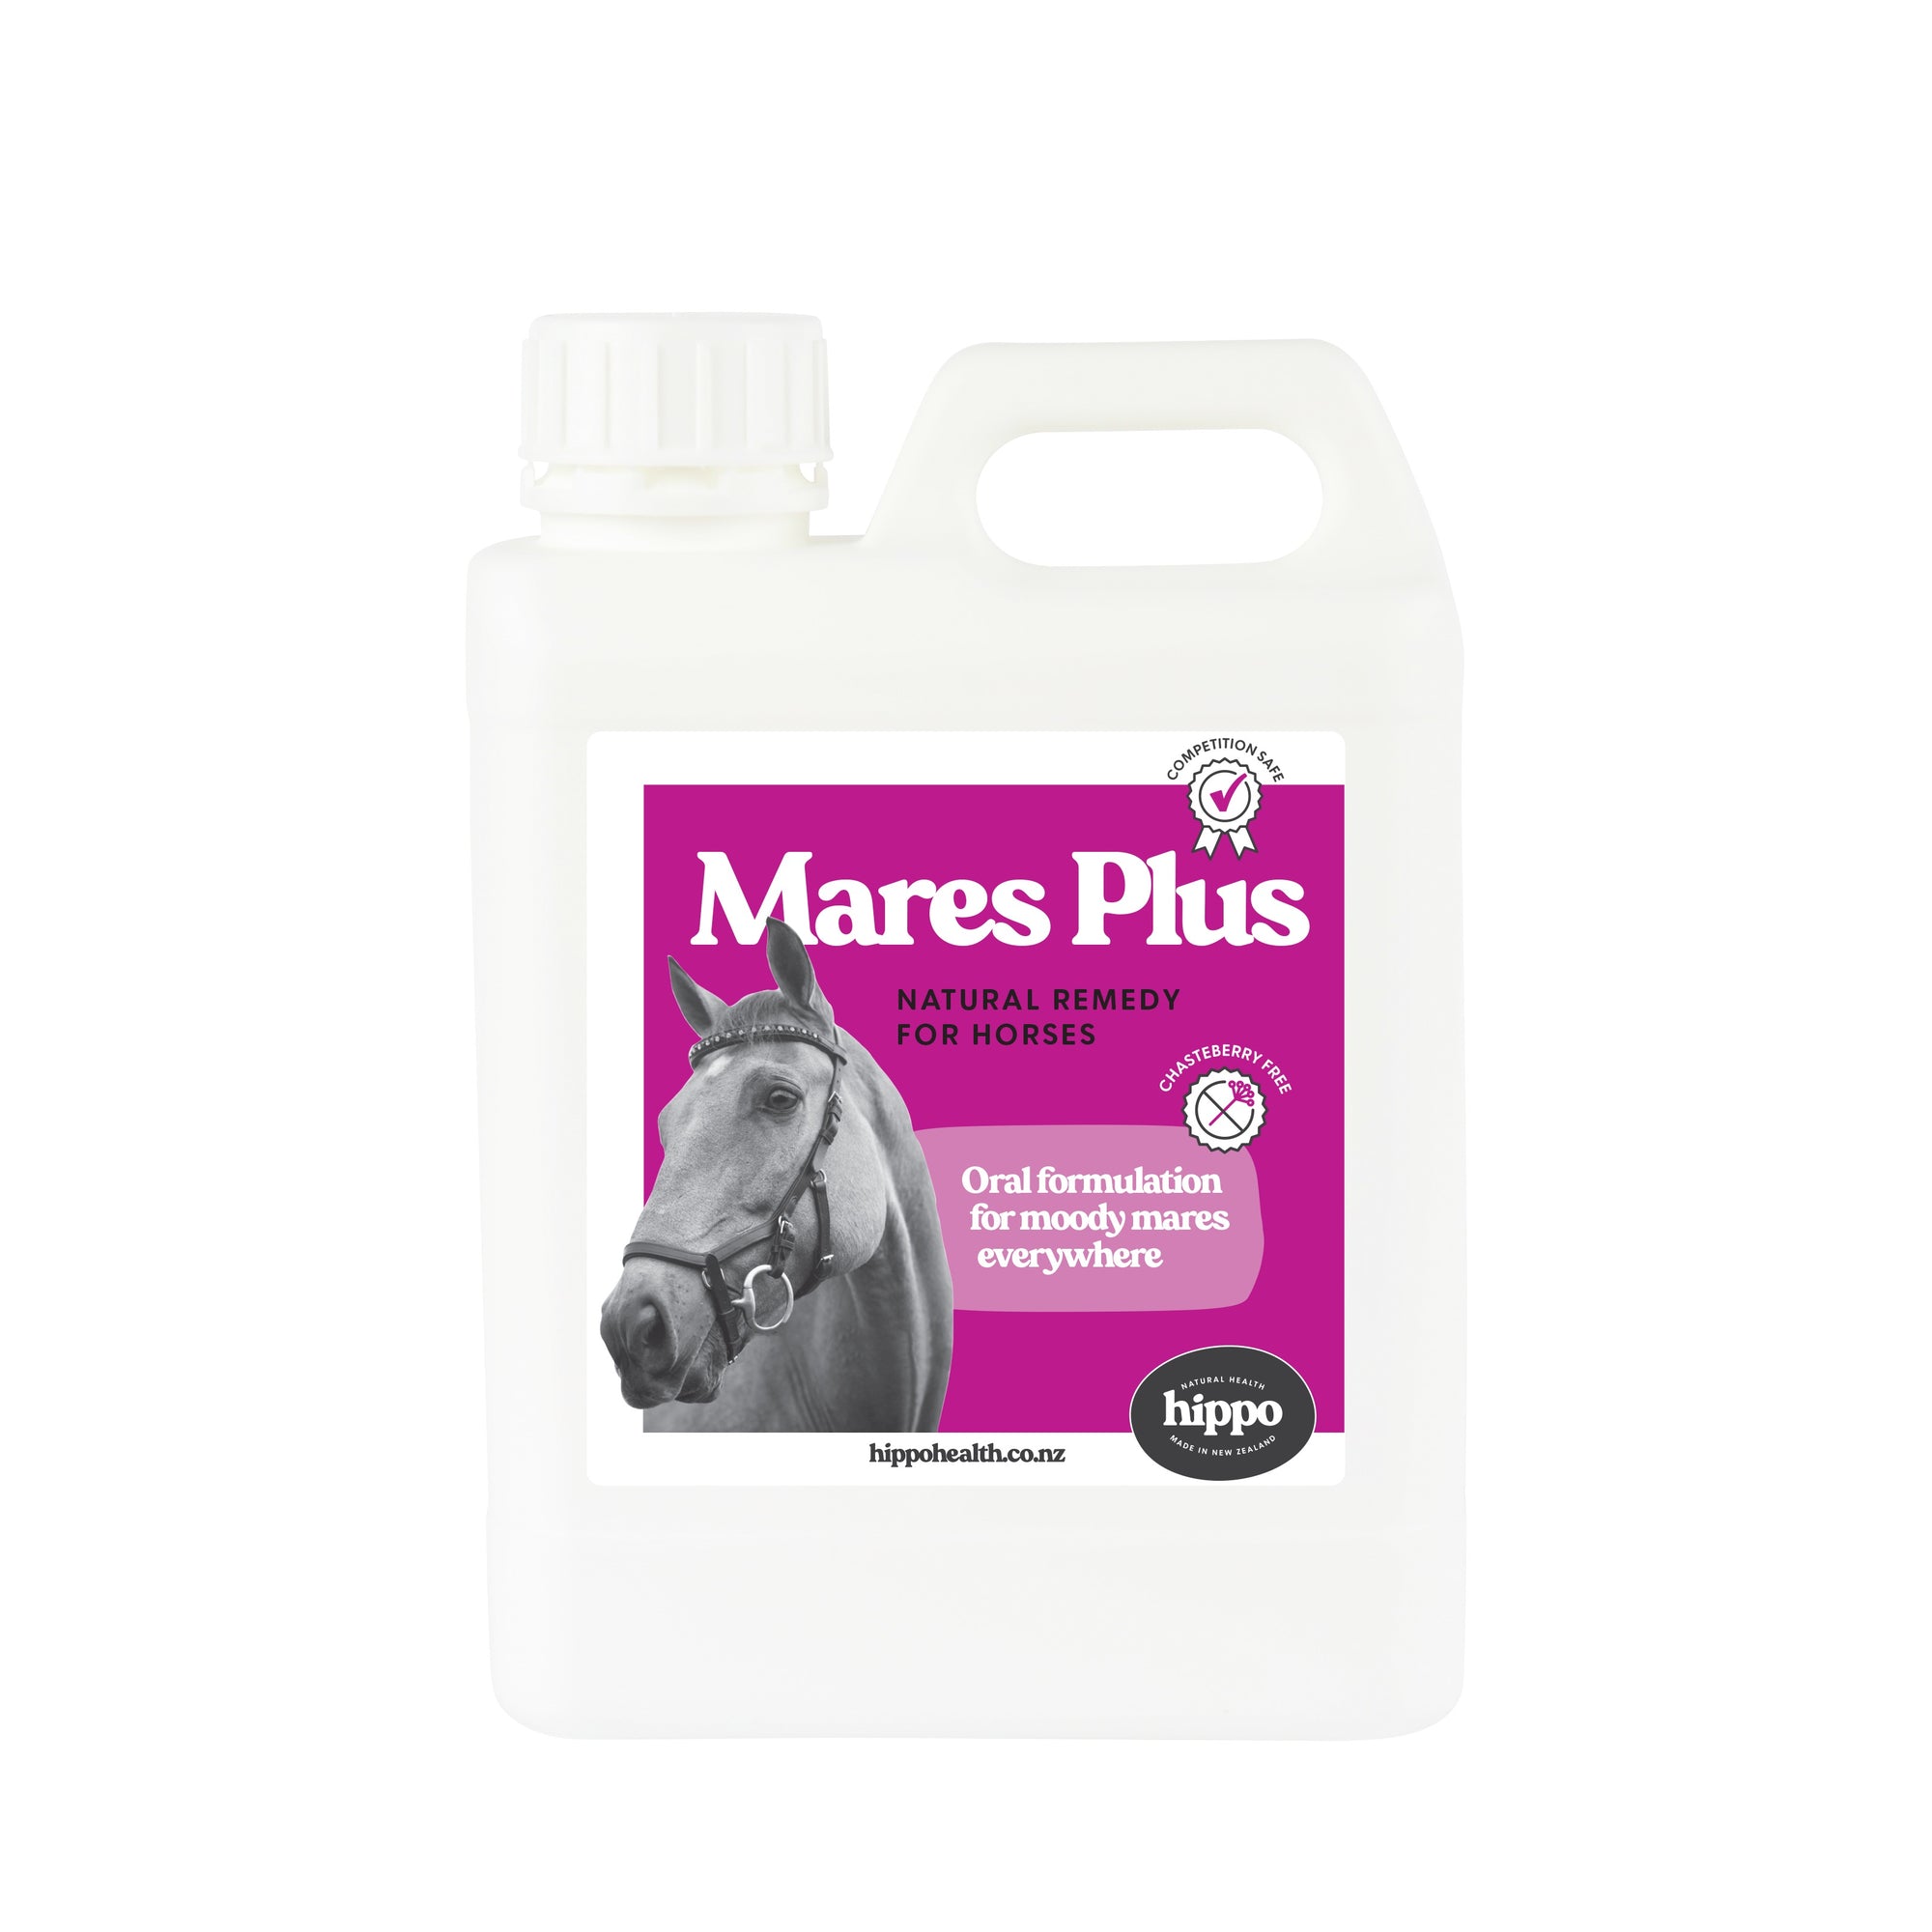 Mares Plus for Horse | Hippo Health